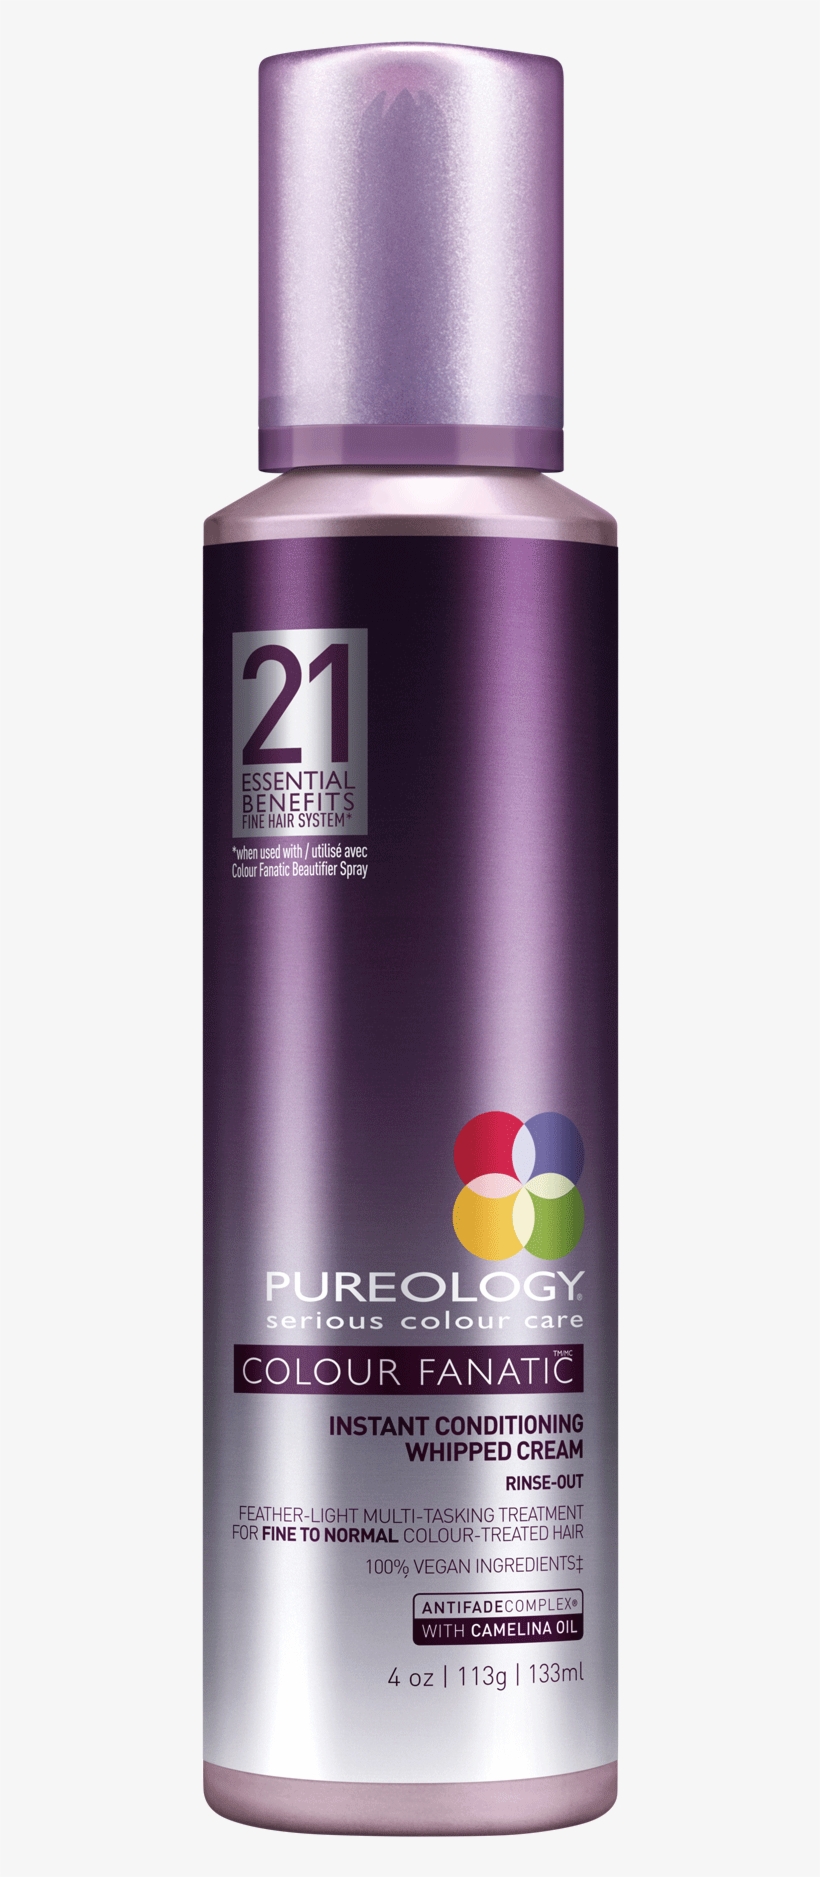 Colour Fanatic Whipped Cream Conditioner - Pureology Colour Fanatic Instant Conditioning Whipped, transparent png #7667908